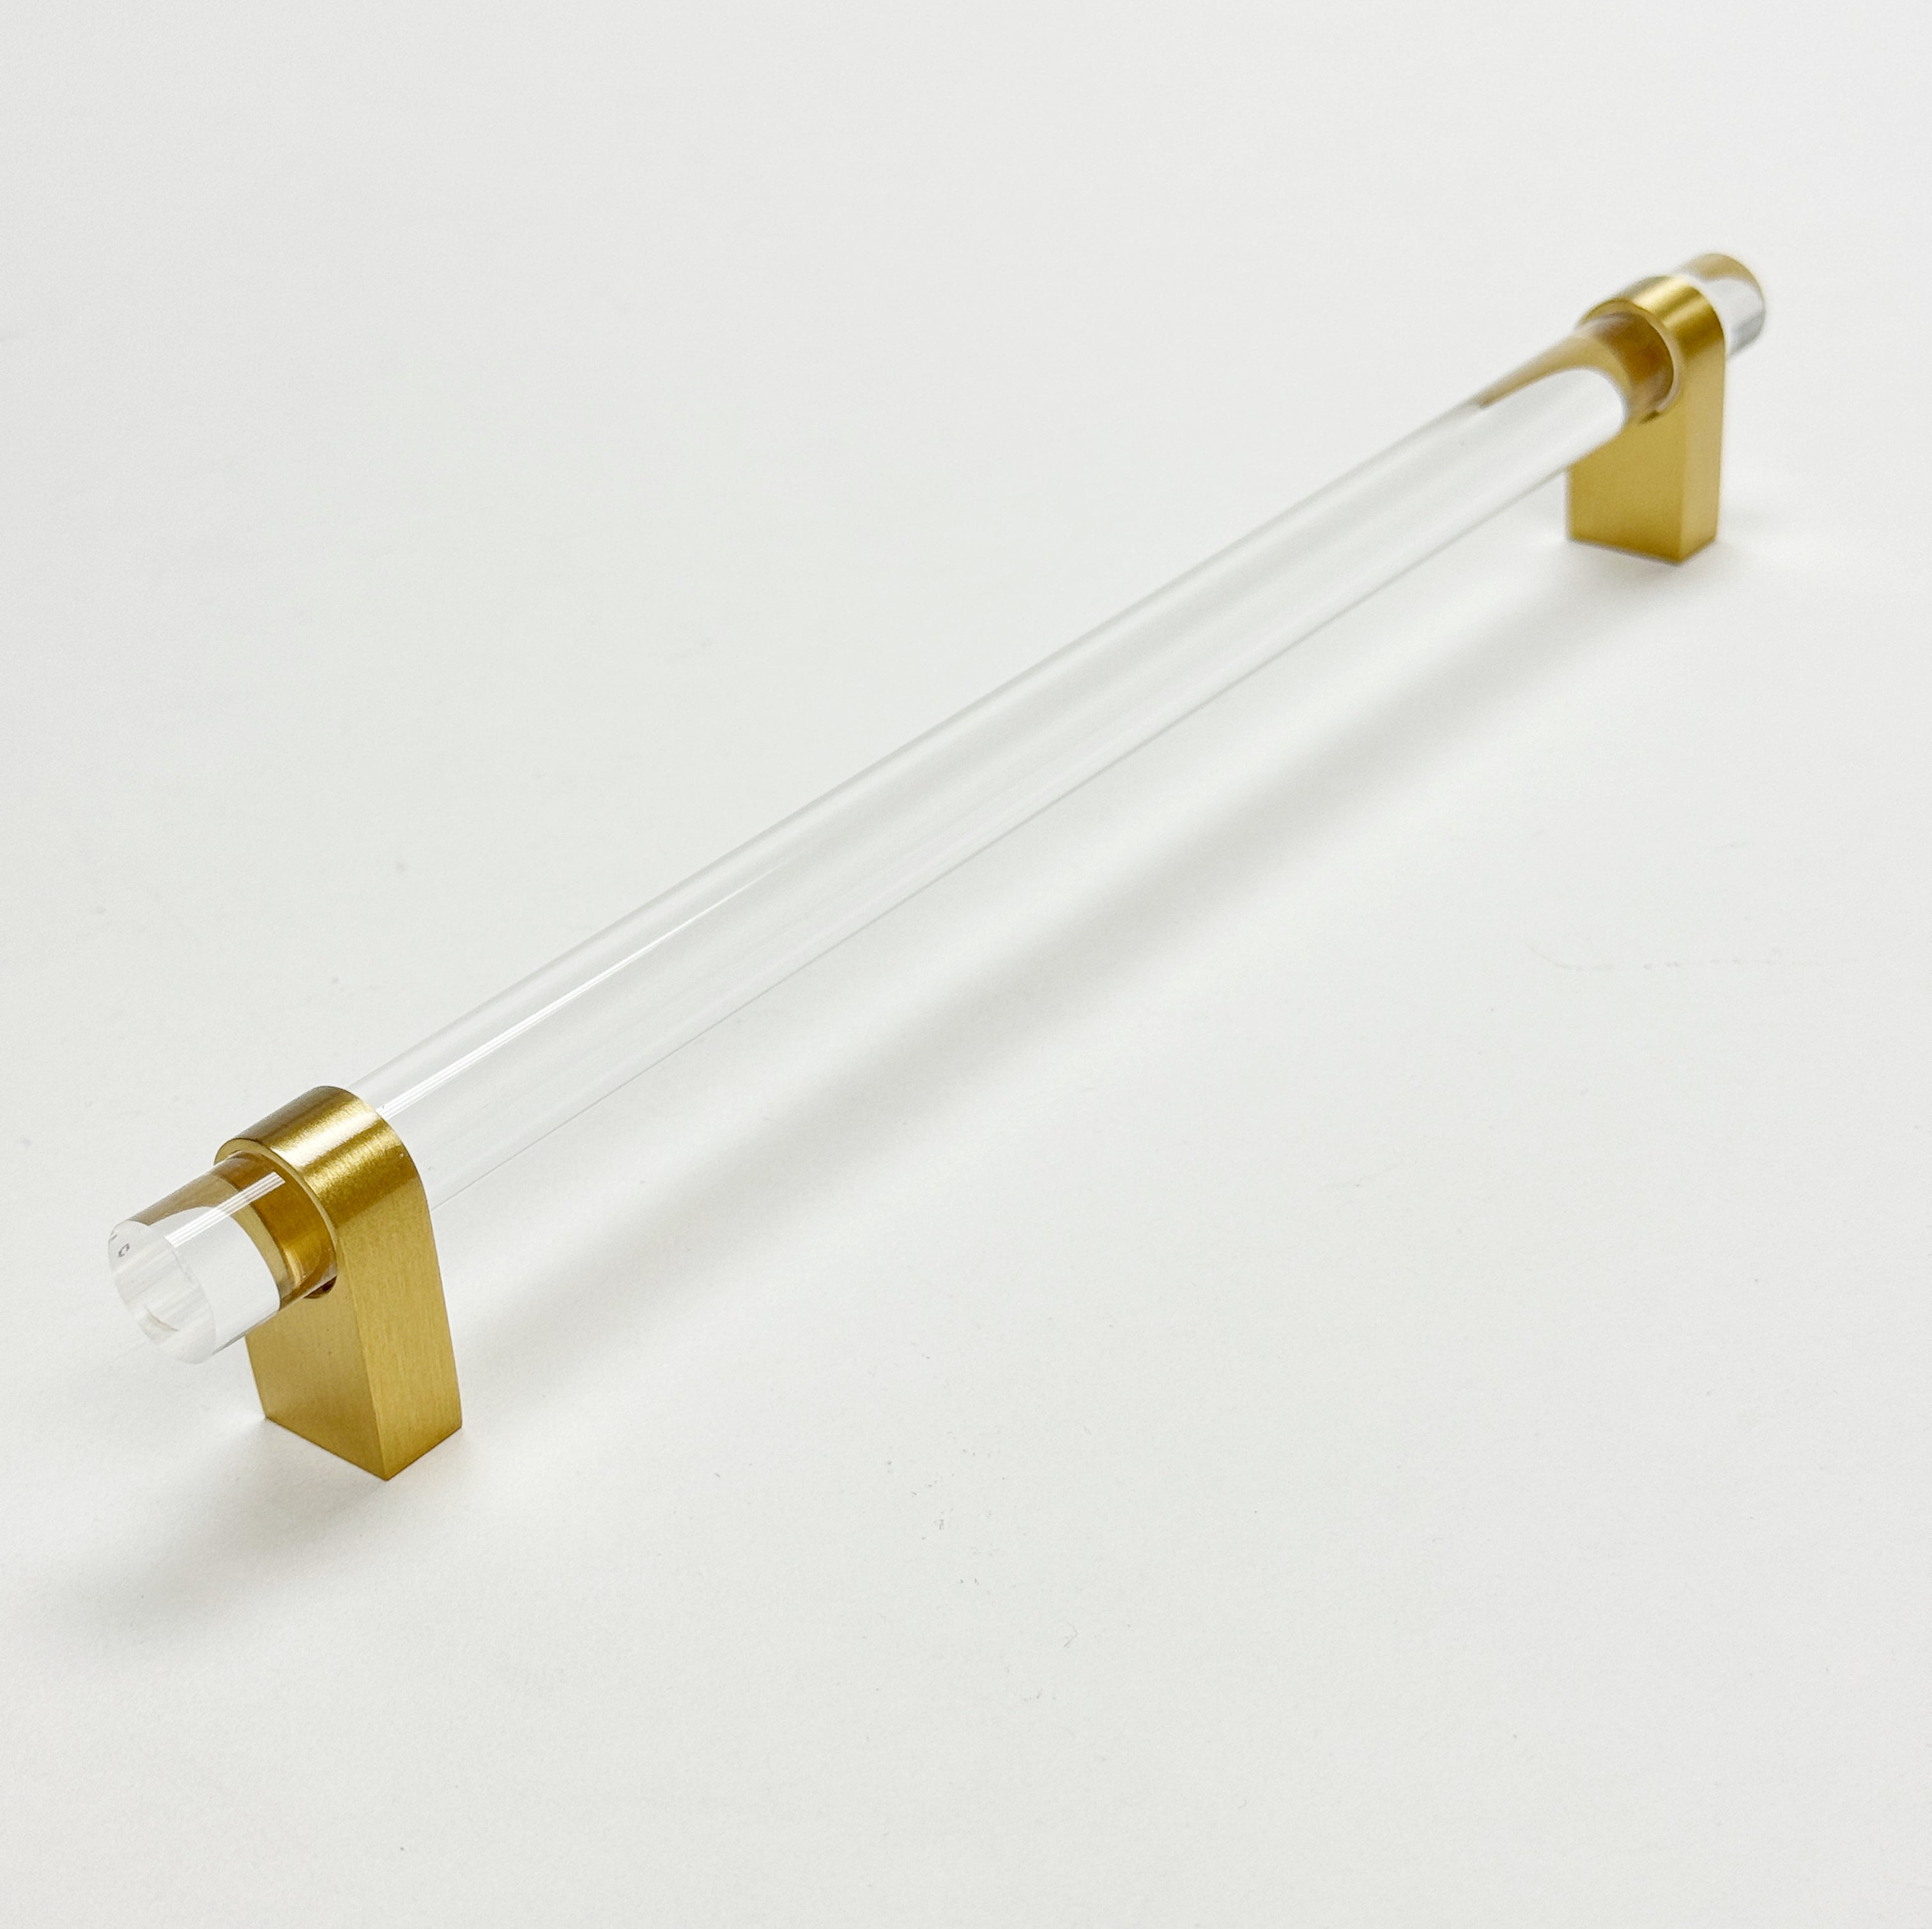 Lucite "June" Brushed Brass Drawer Pulls and Knobs - Industry Hardware